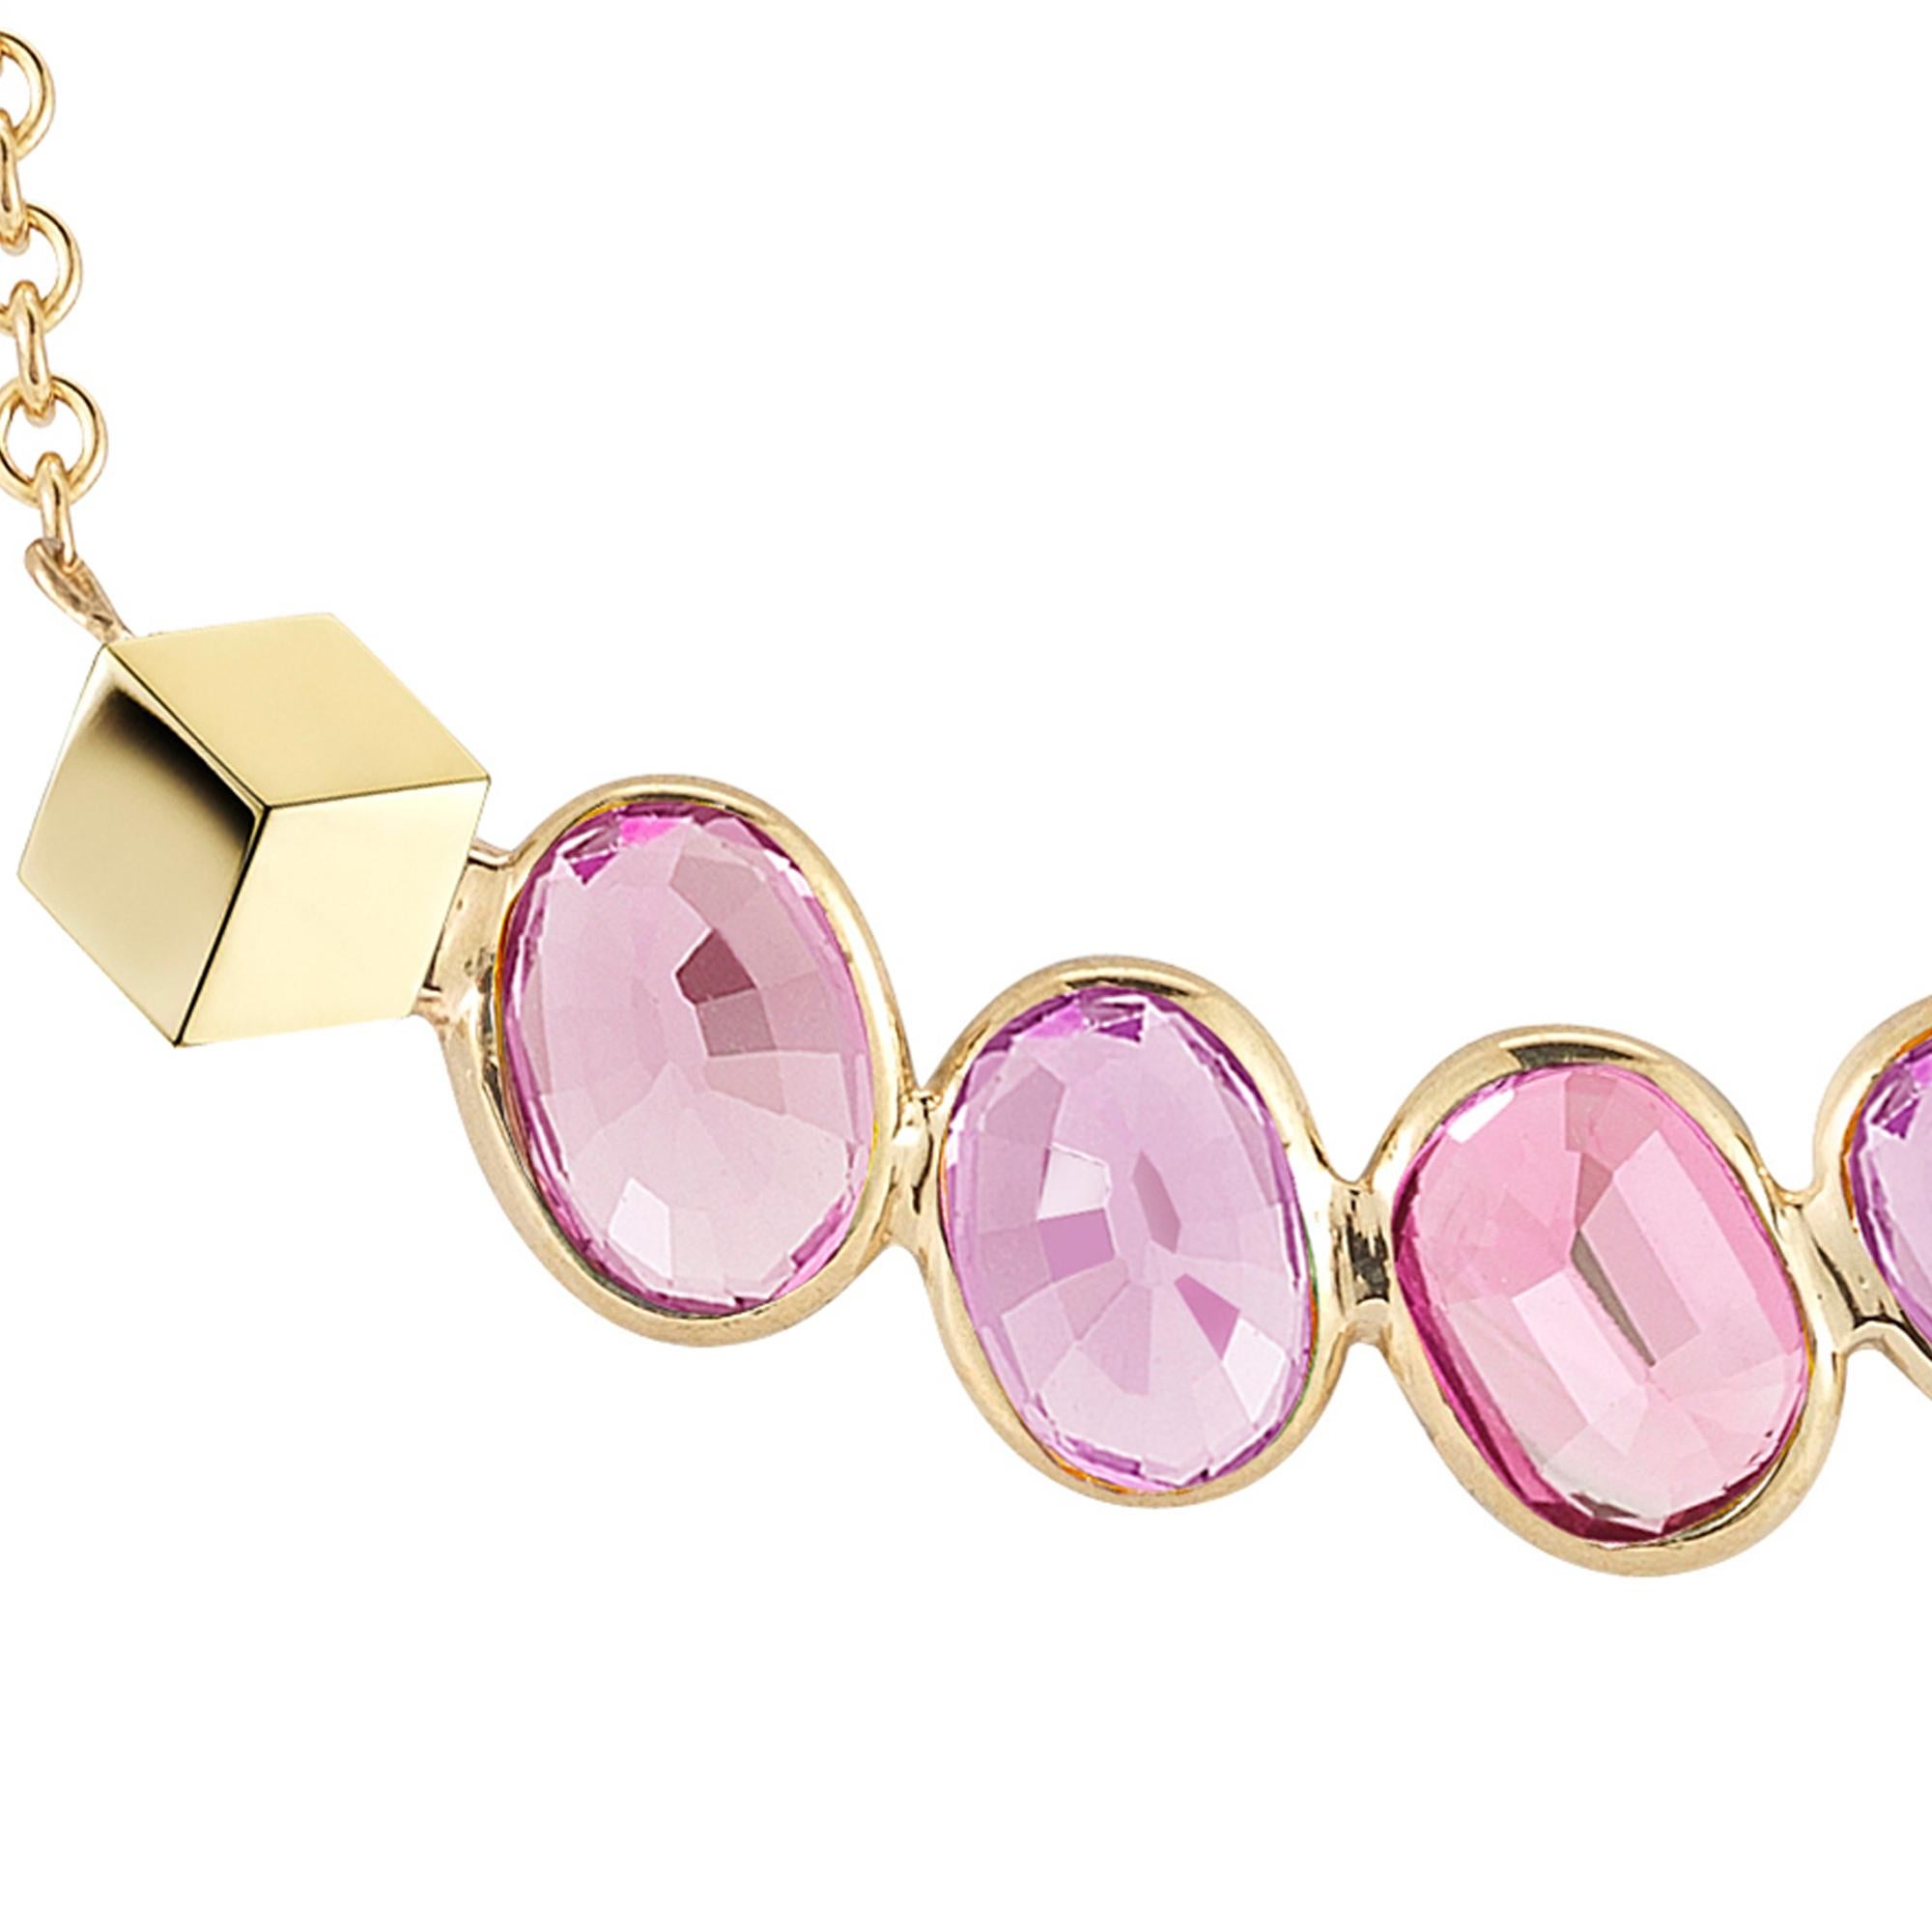 Oval Cut Paolo Costagli 18kt Yellow Gold Pink Sapphire, 2.91 Carat Ombré Pendant Necklace For Sale